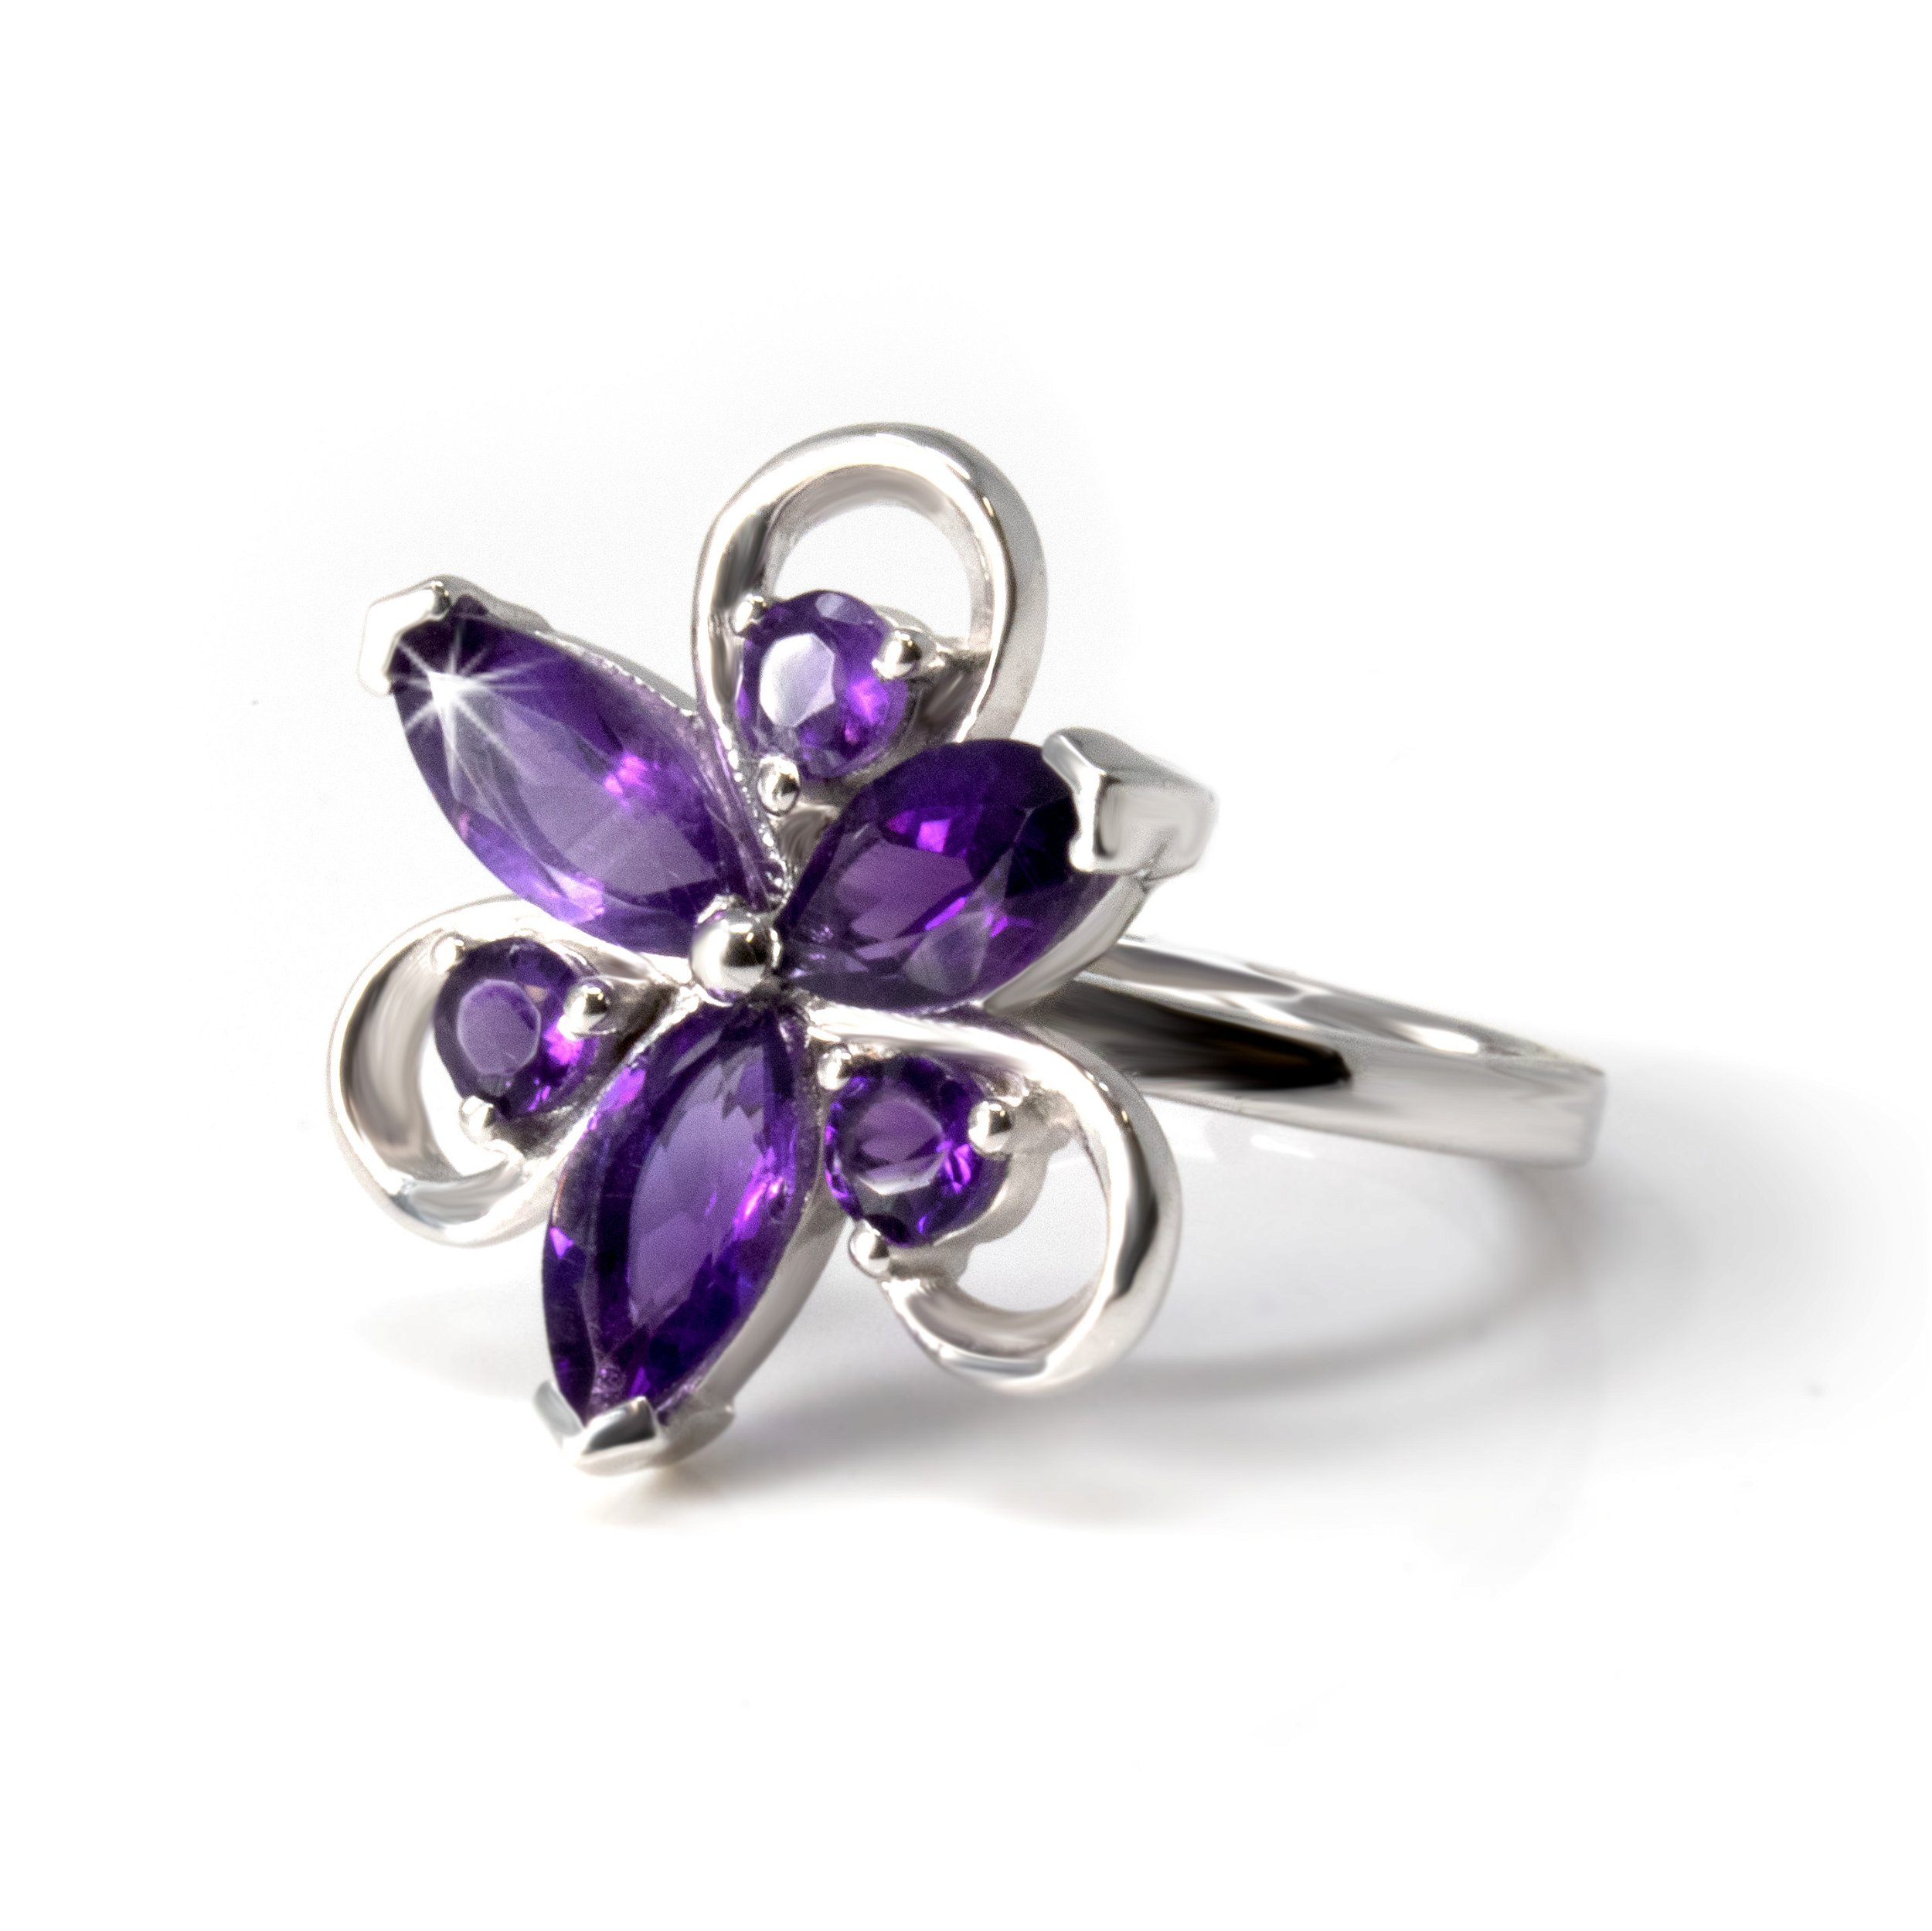 Faceted Amethyst Ring Size 5 - with 3 Faceted Sharp Ovals & 3 Faceted Rounds With Silver Loop Detail - Water Lily Shape - Prong Set